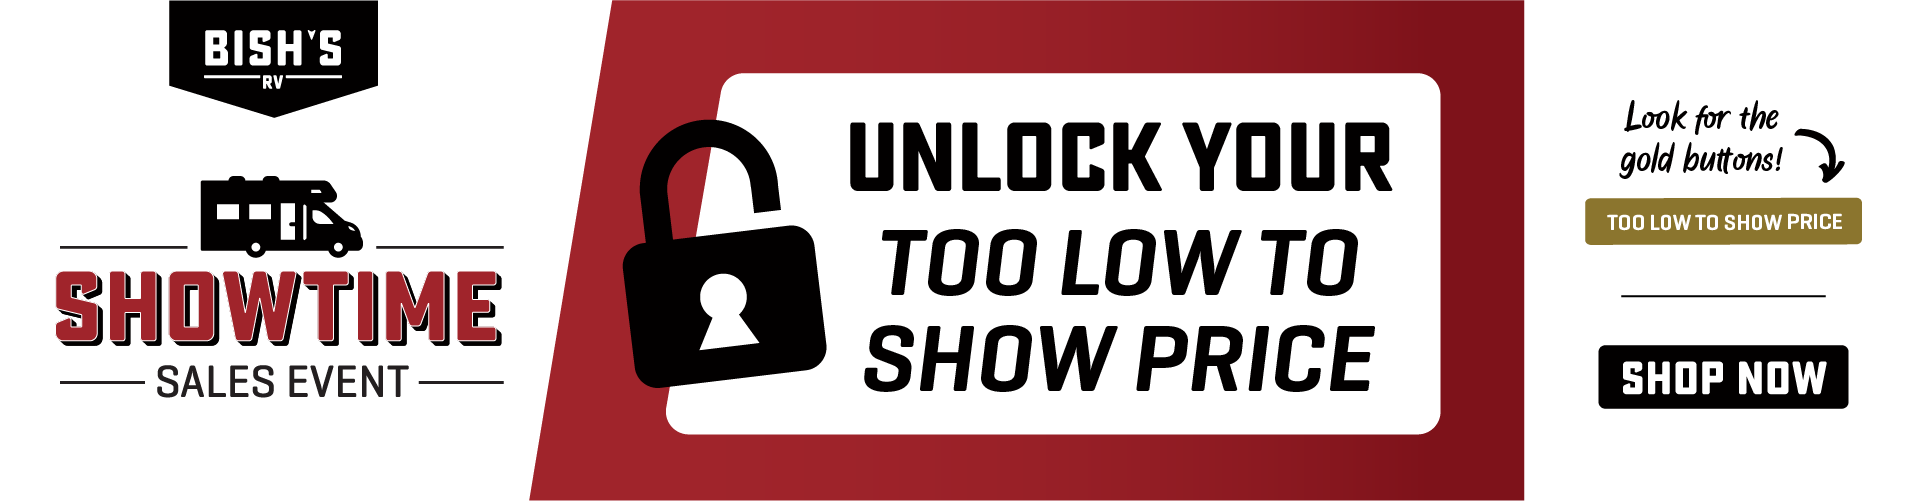 Showtime Sales Event - Unlock your Too Low To Show Price!